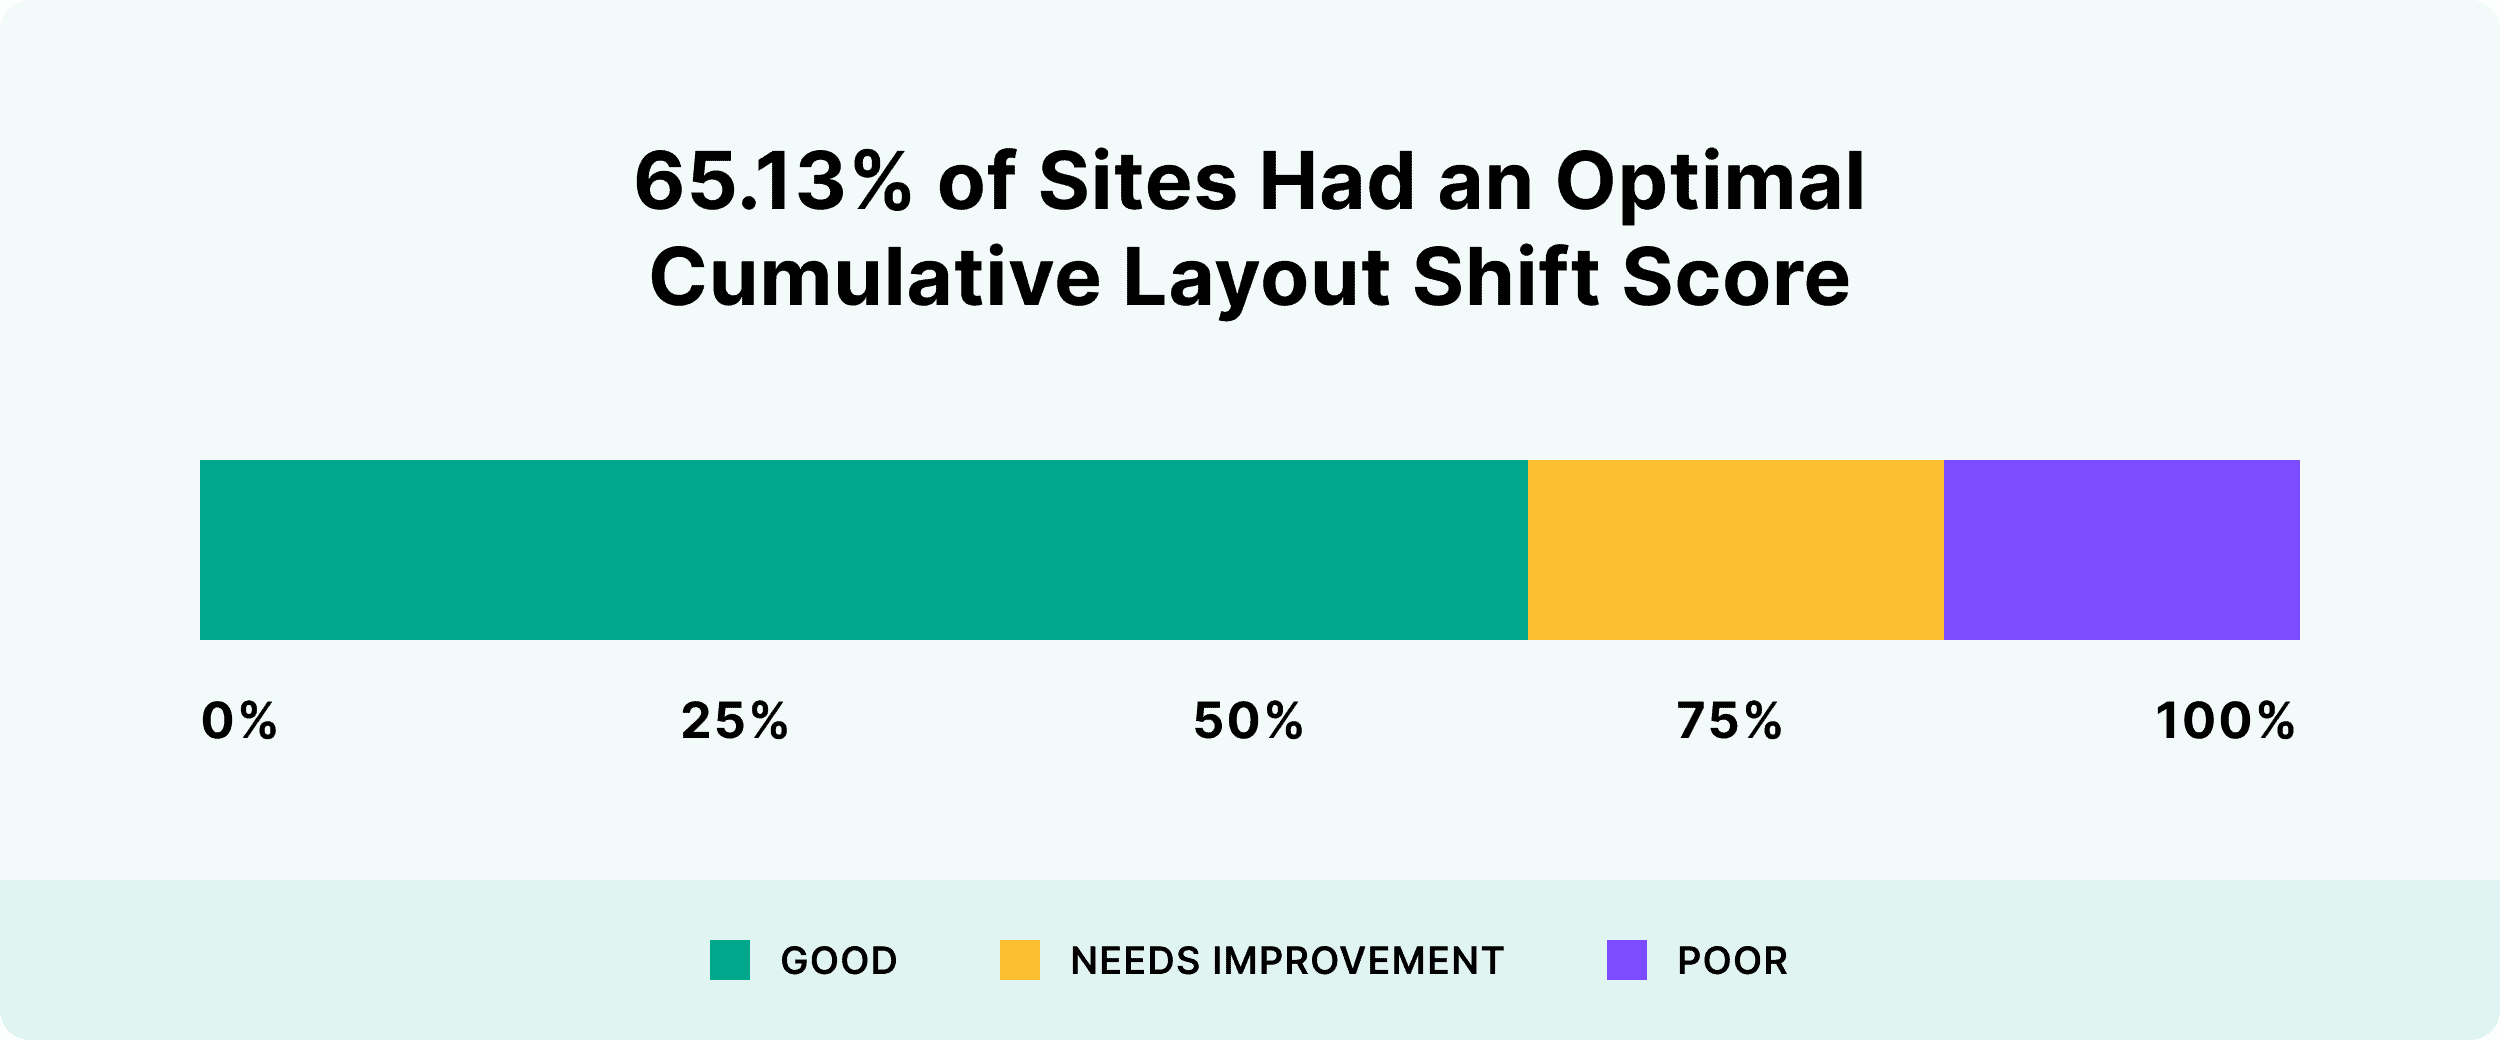 65.13% of sites-had an optimal cumulative layout shift score